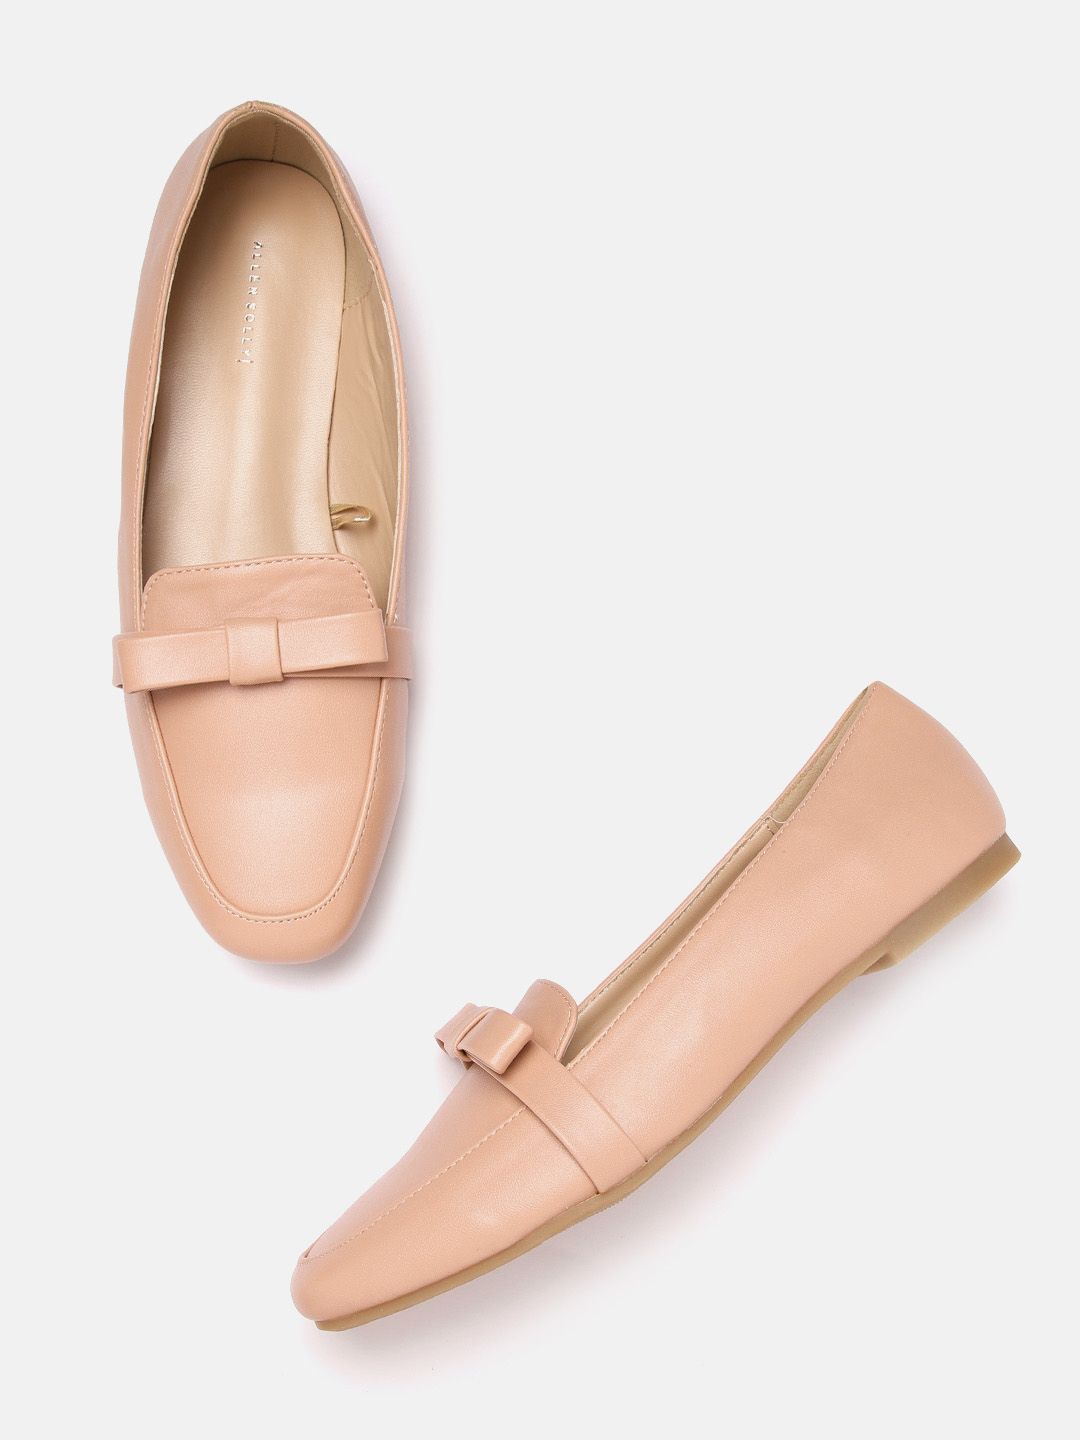 Allen Solly Women Pink Nude-Coloured PU Loafers with Bow Detail Price in India